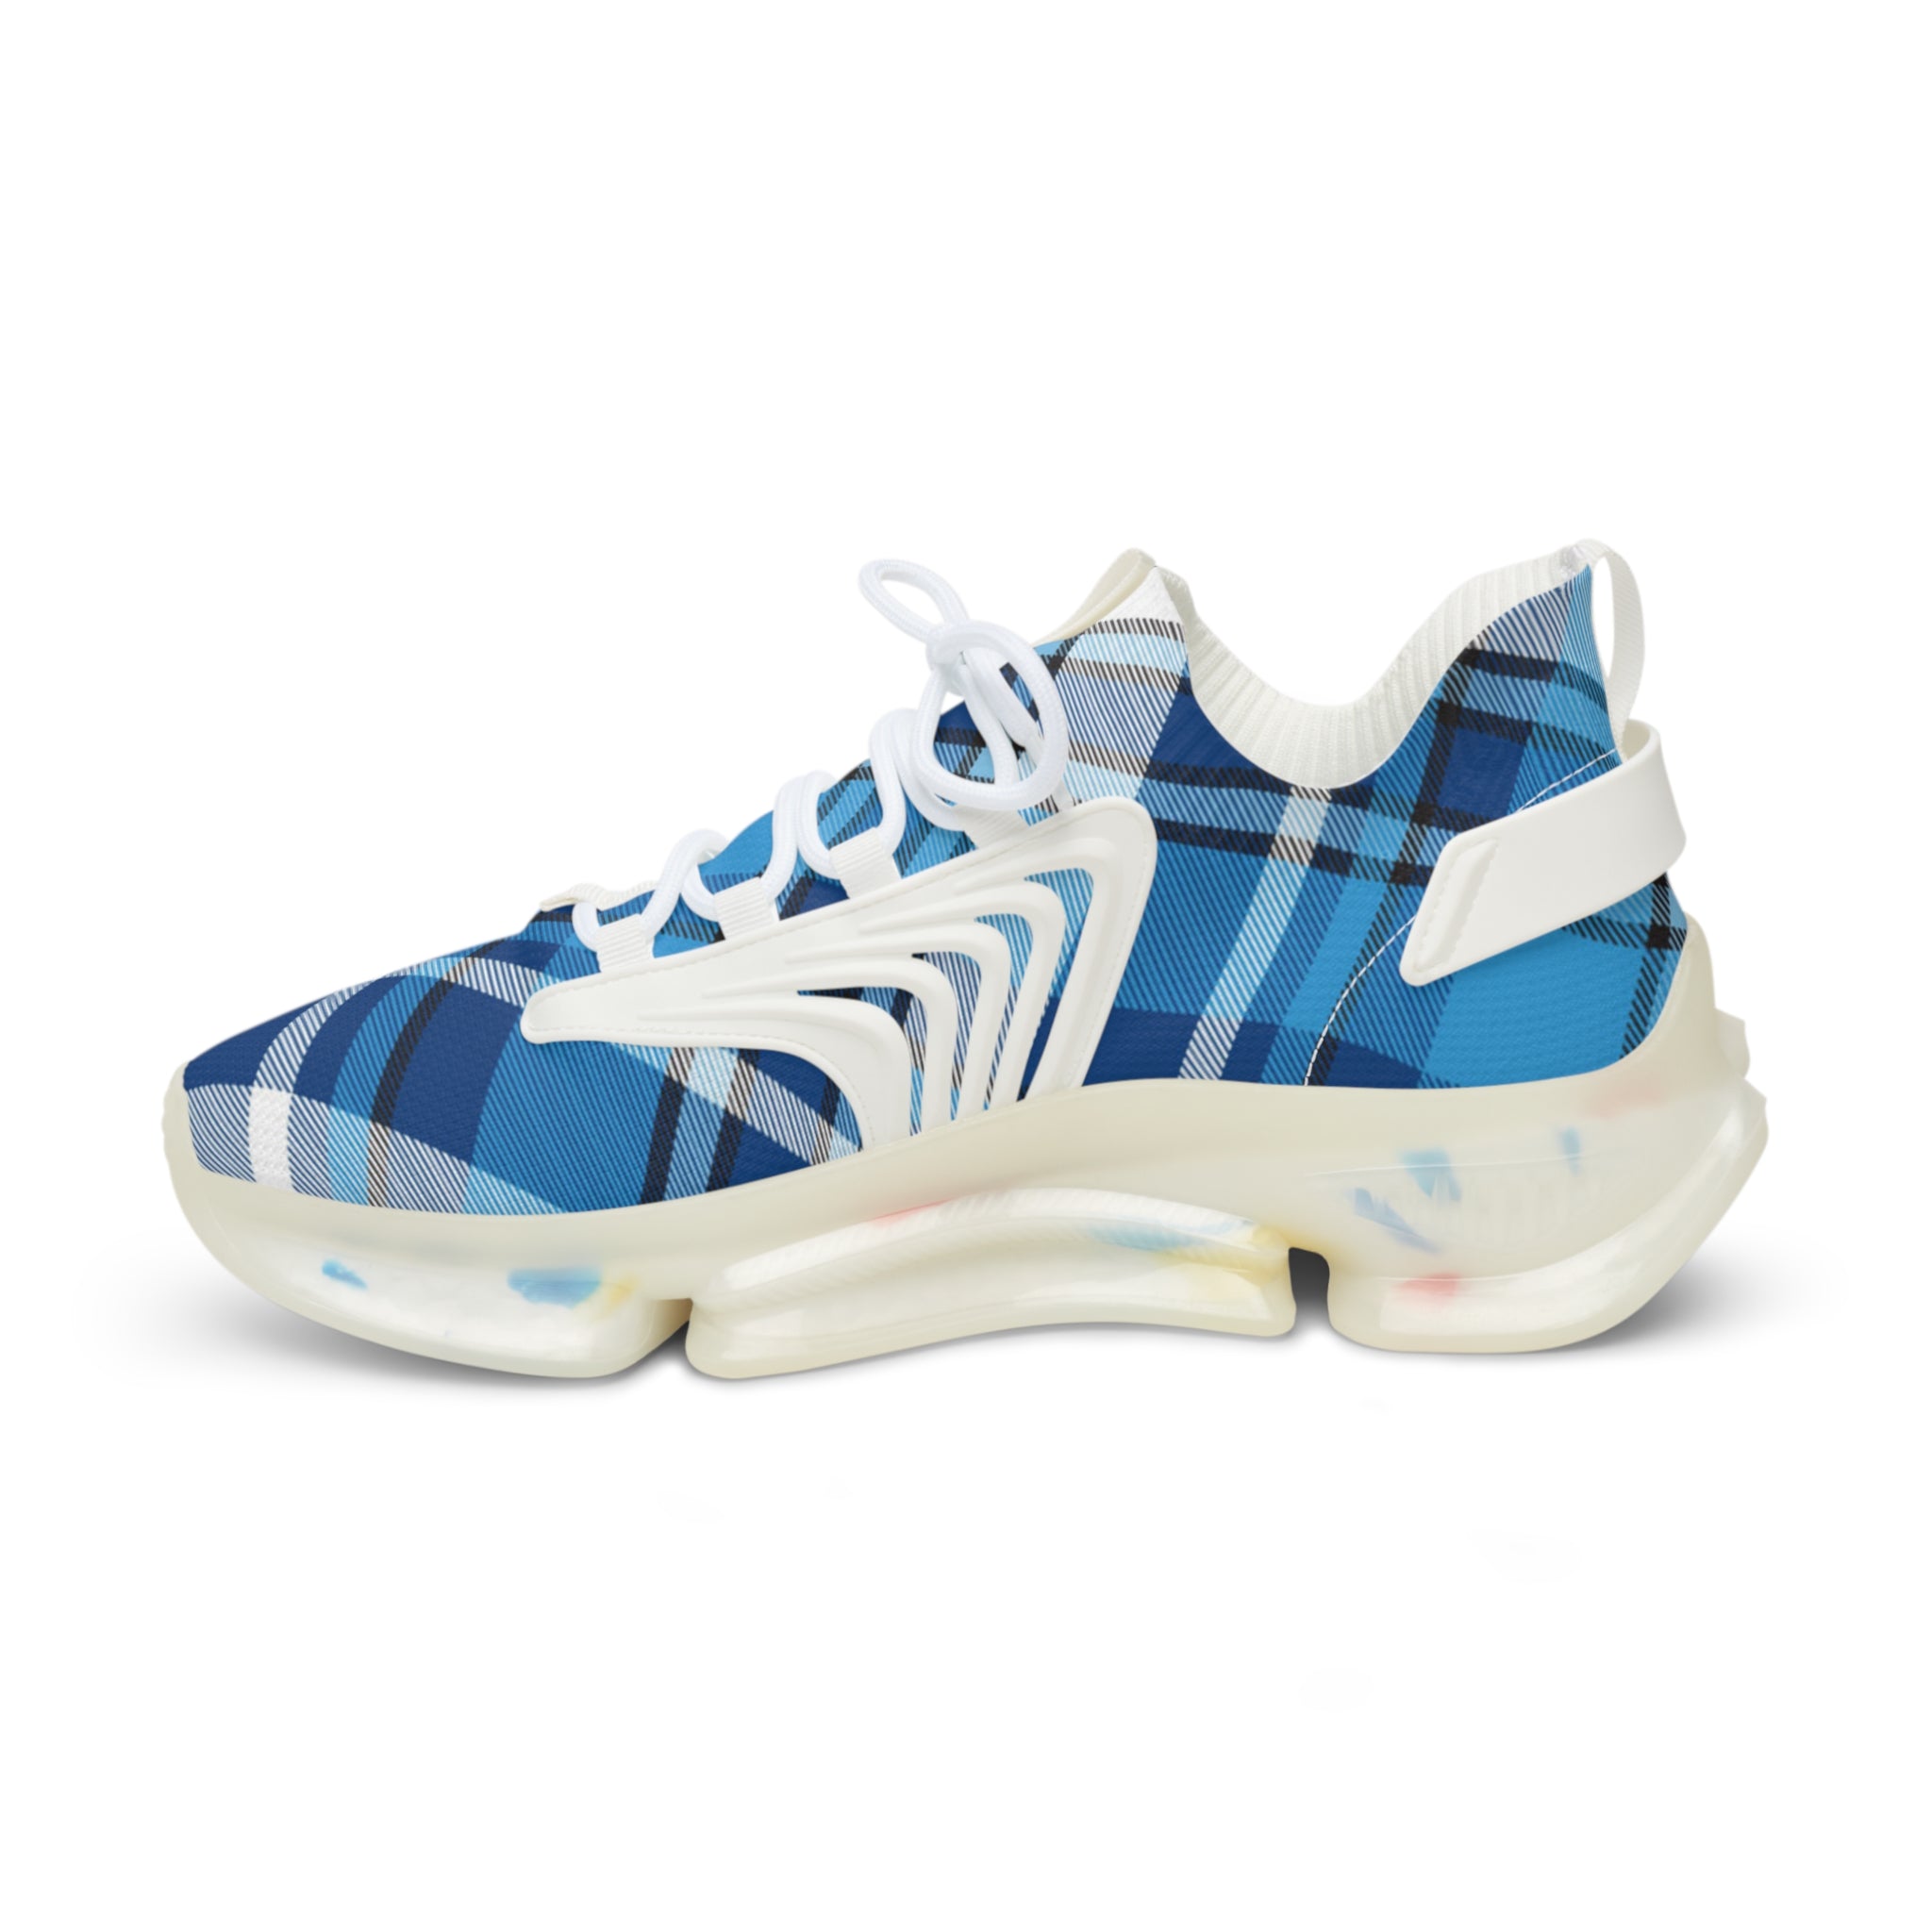 Groove Fashion Collection Blue Plaid Men's Mesh Sneakers with Black or White Sole